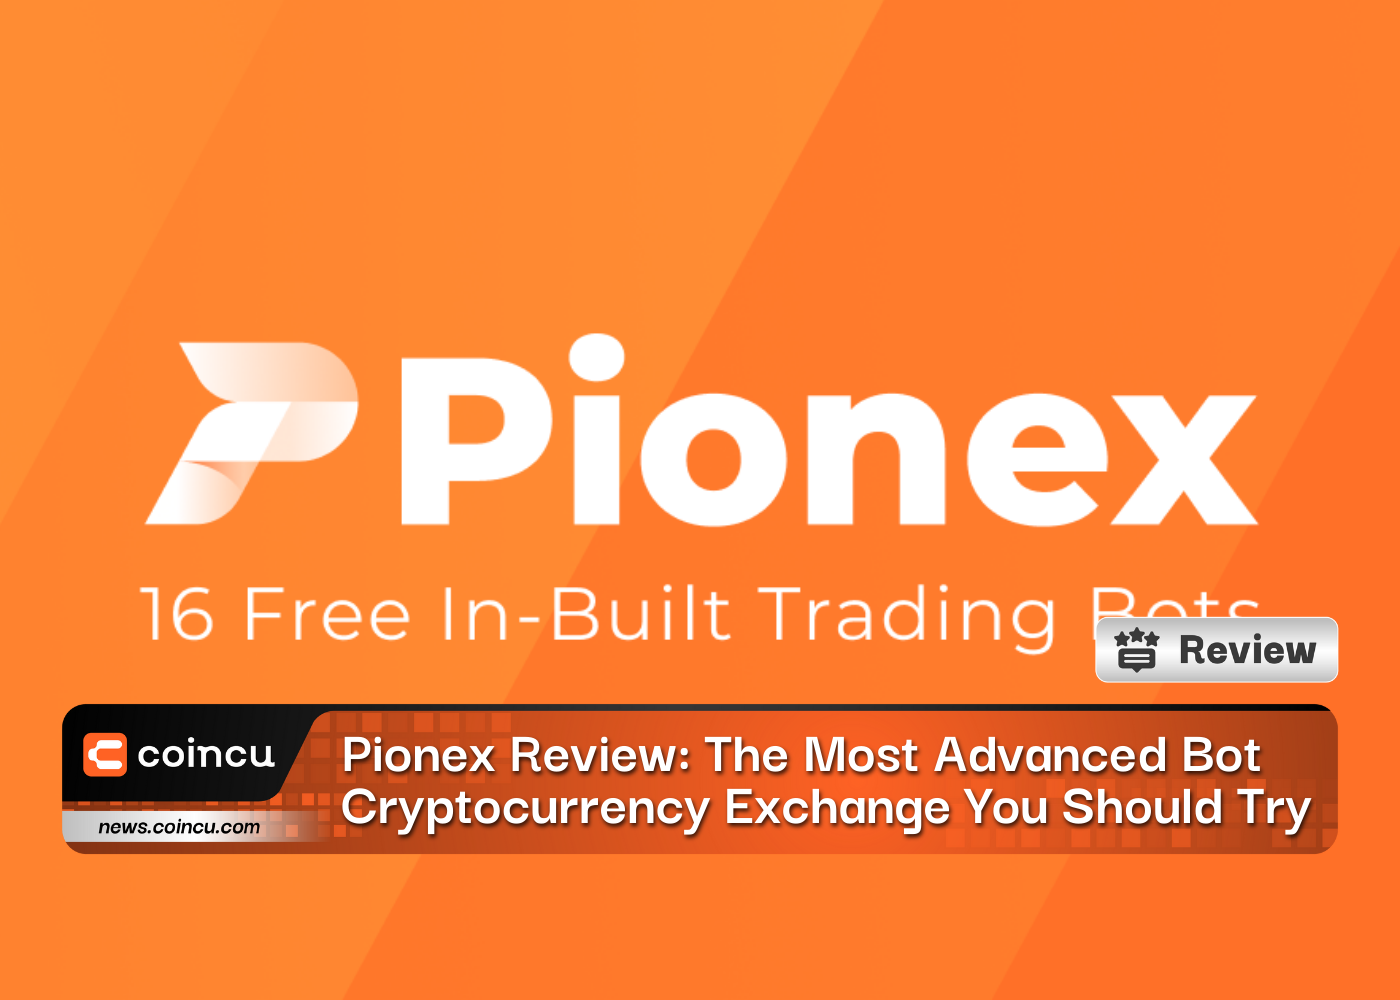 Pionex Review: The Most Advanced Bot Cryptocurrency Exchange You Should Try